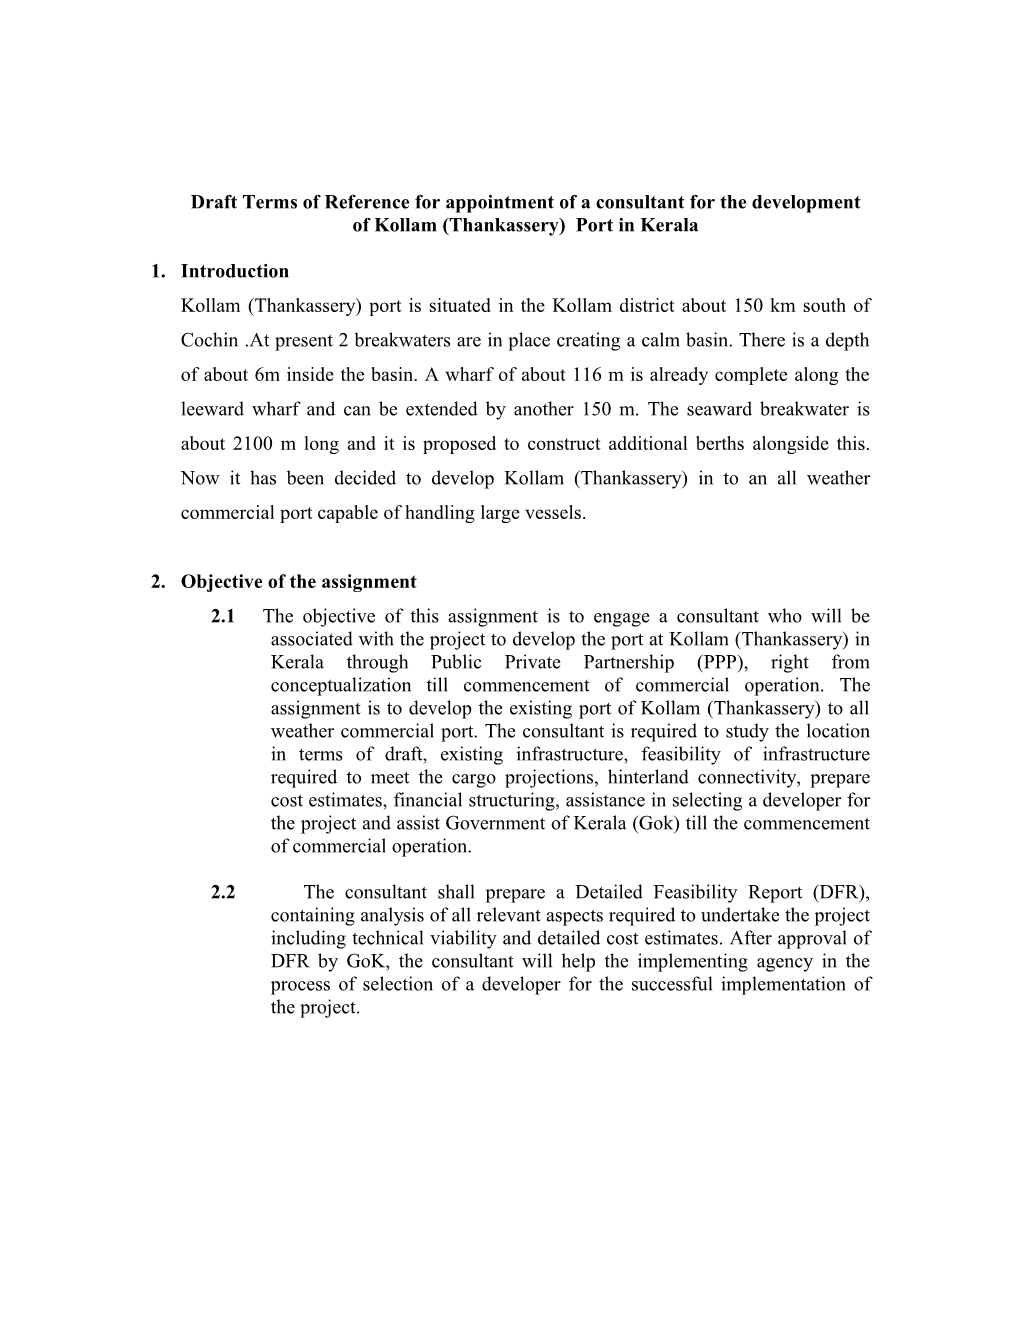 Draft Terms of Reference for Appointment of a Consultant for the Development of Kollam